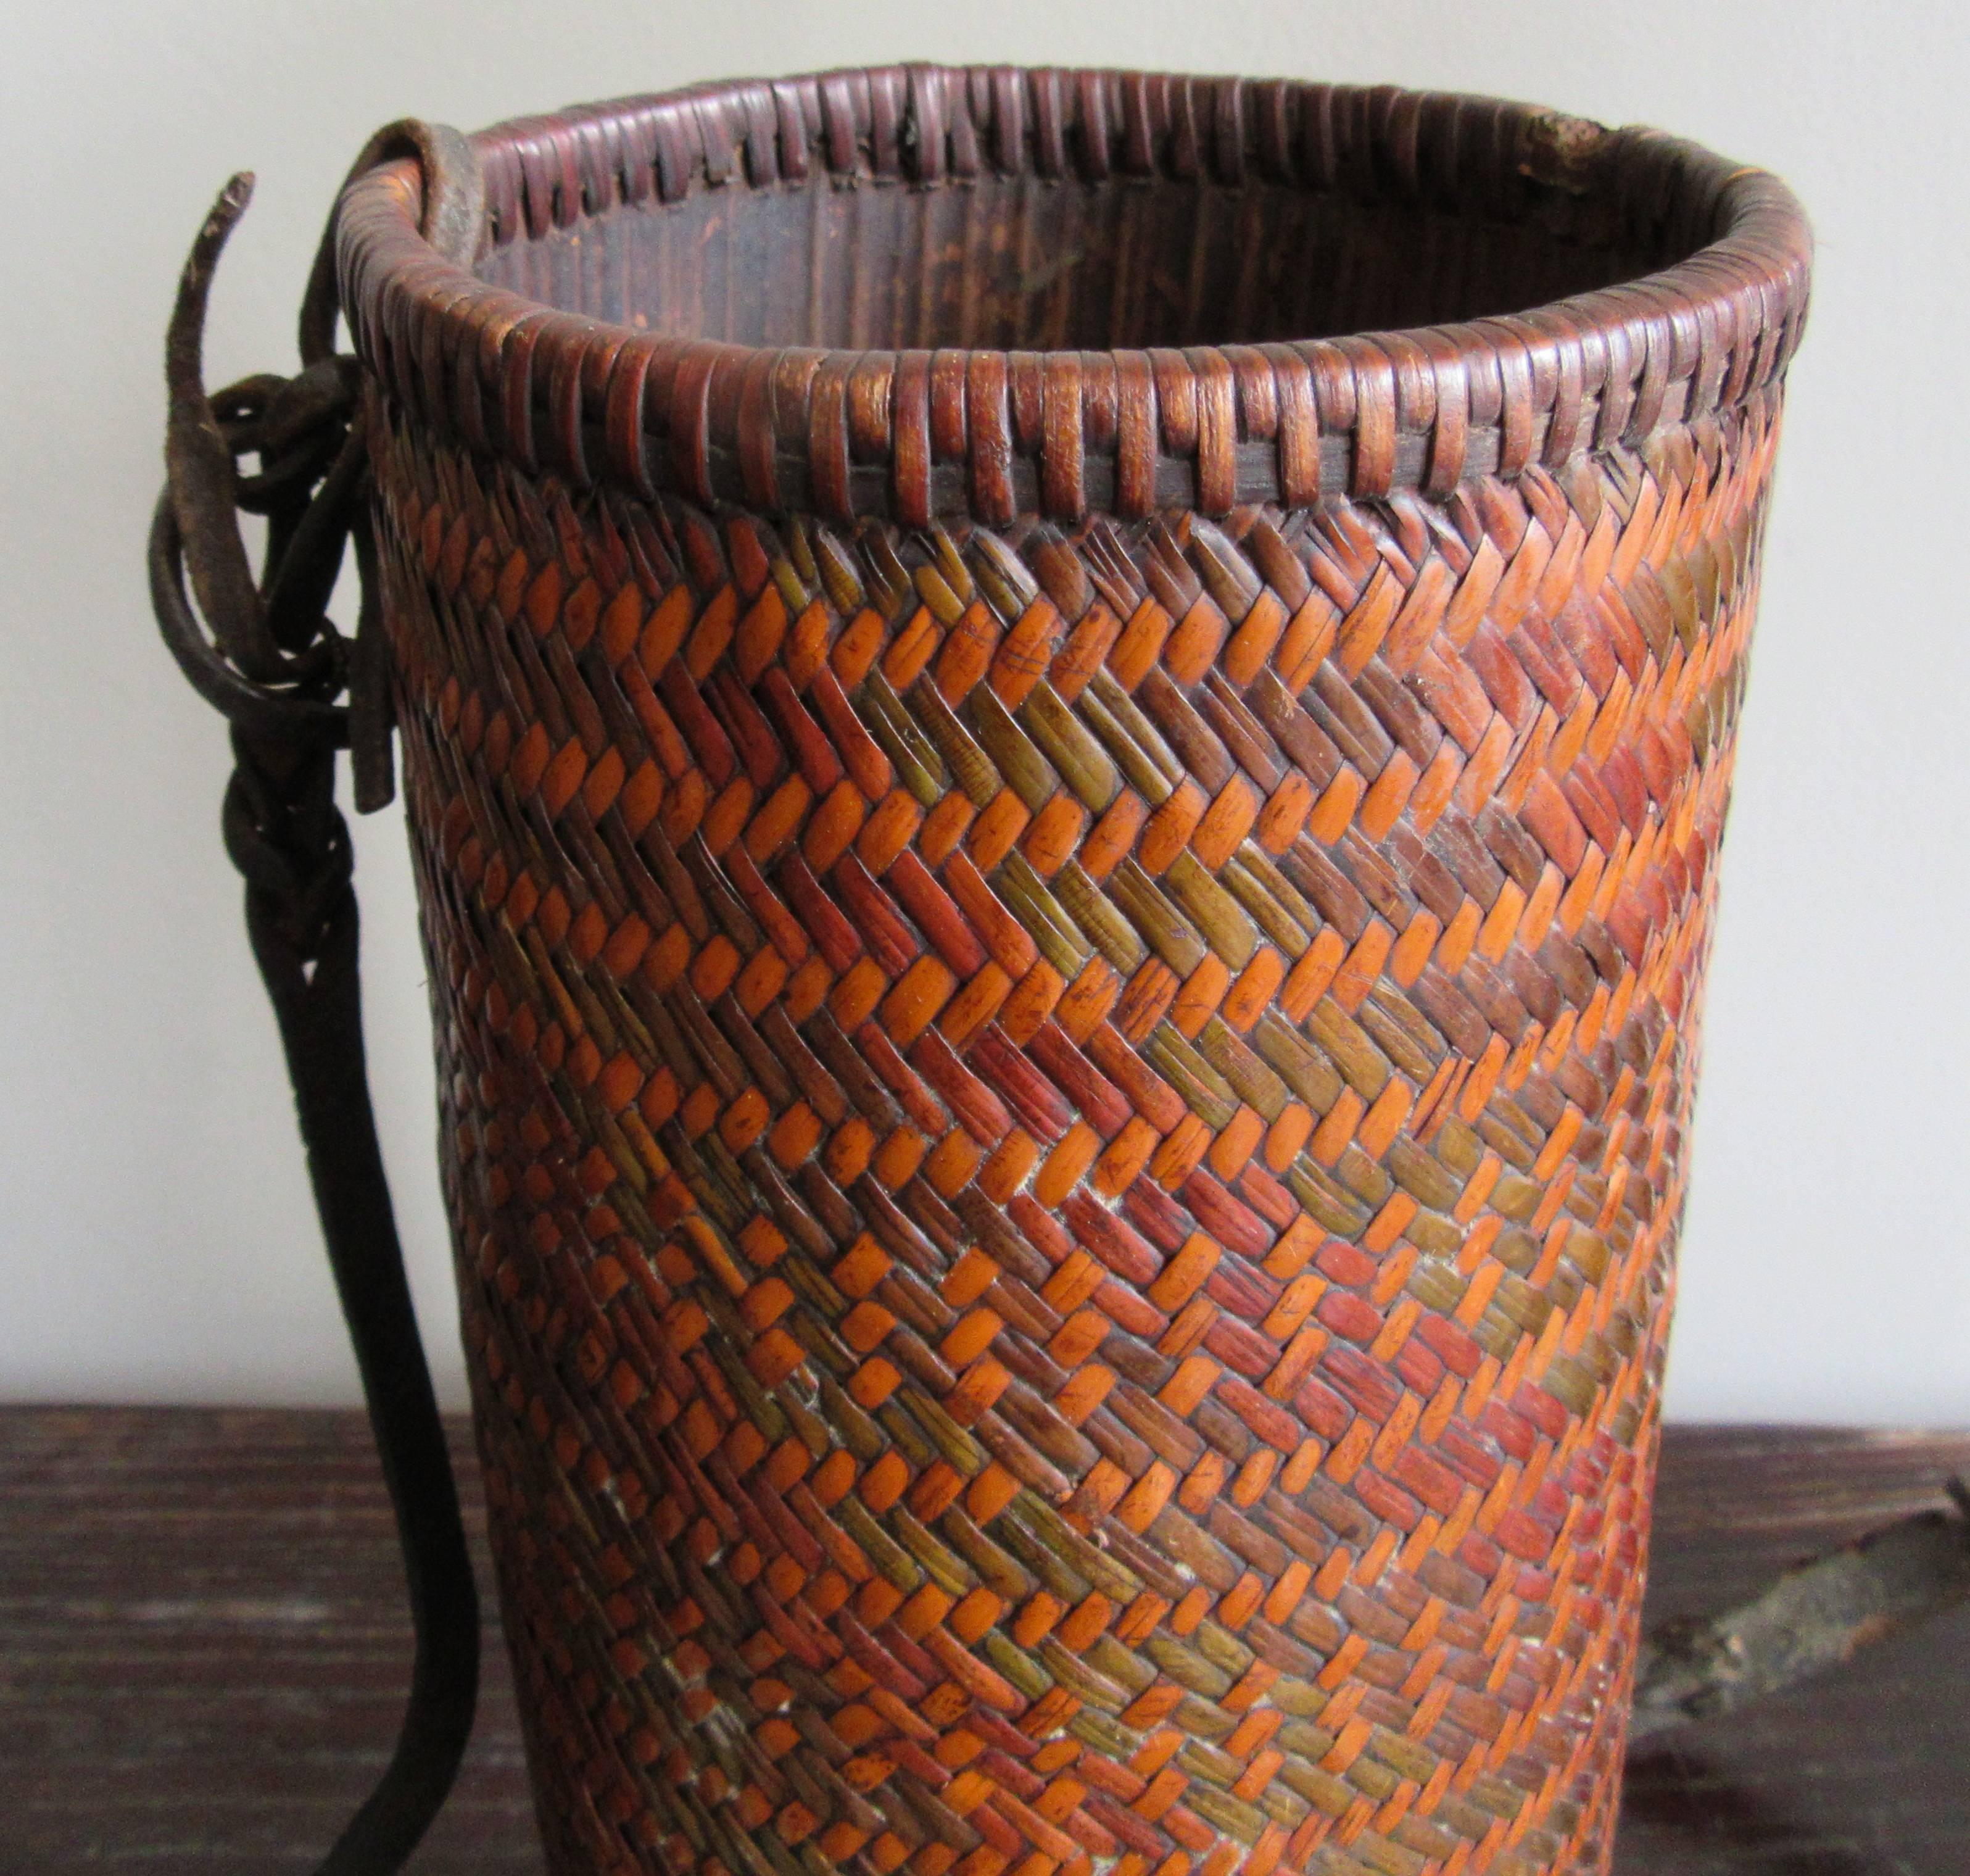 Intricately woven rattan thermos from Bhutan, each has a distinctive pattern. These thermoses were filled with barley beer and carried throughout the hills and mountains by the peasants.